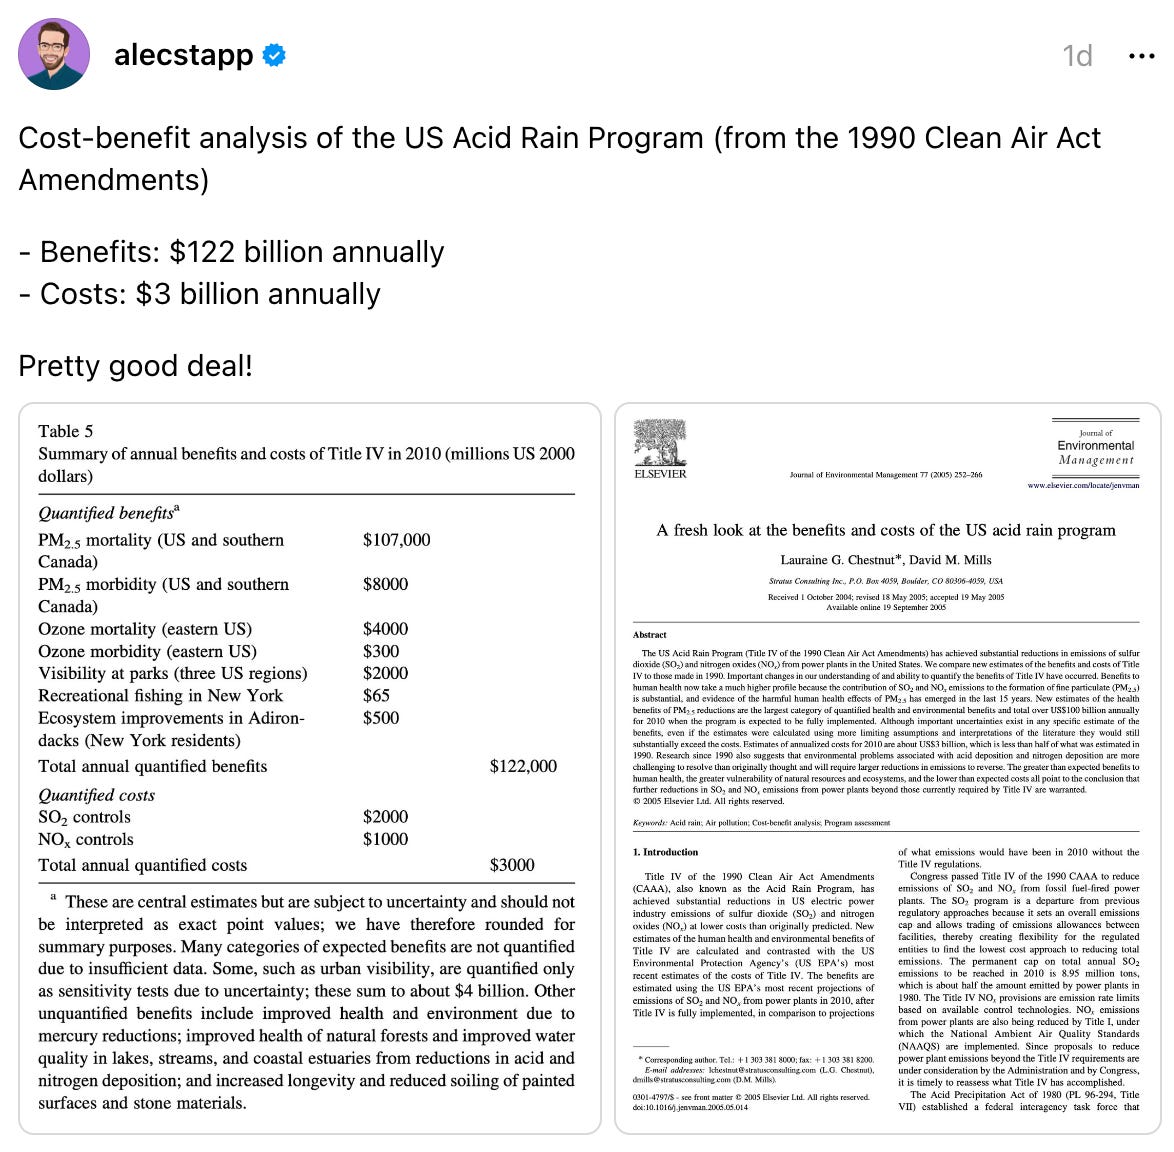 1d Cost-benefit analysis of the US Acid Rain Program (from the 1990 Clean Air Act Amendments) - Benefits: $122 billion annually - Costs: $3 billion annually Pretty good deal!